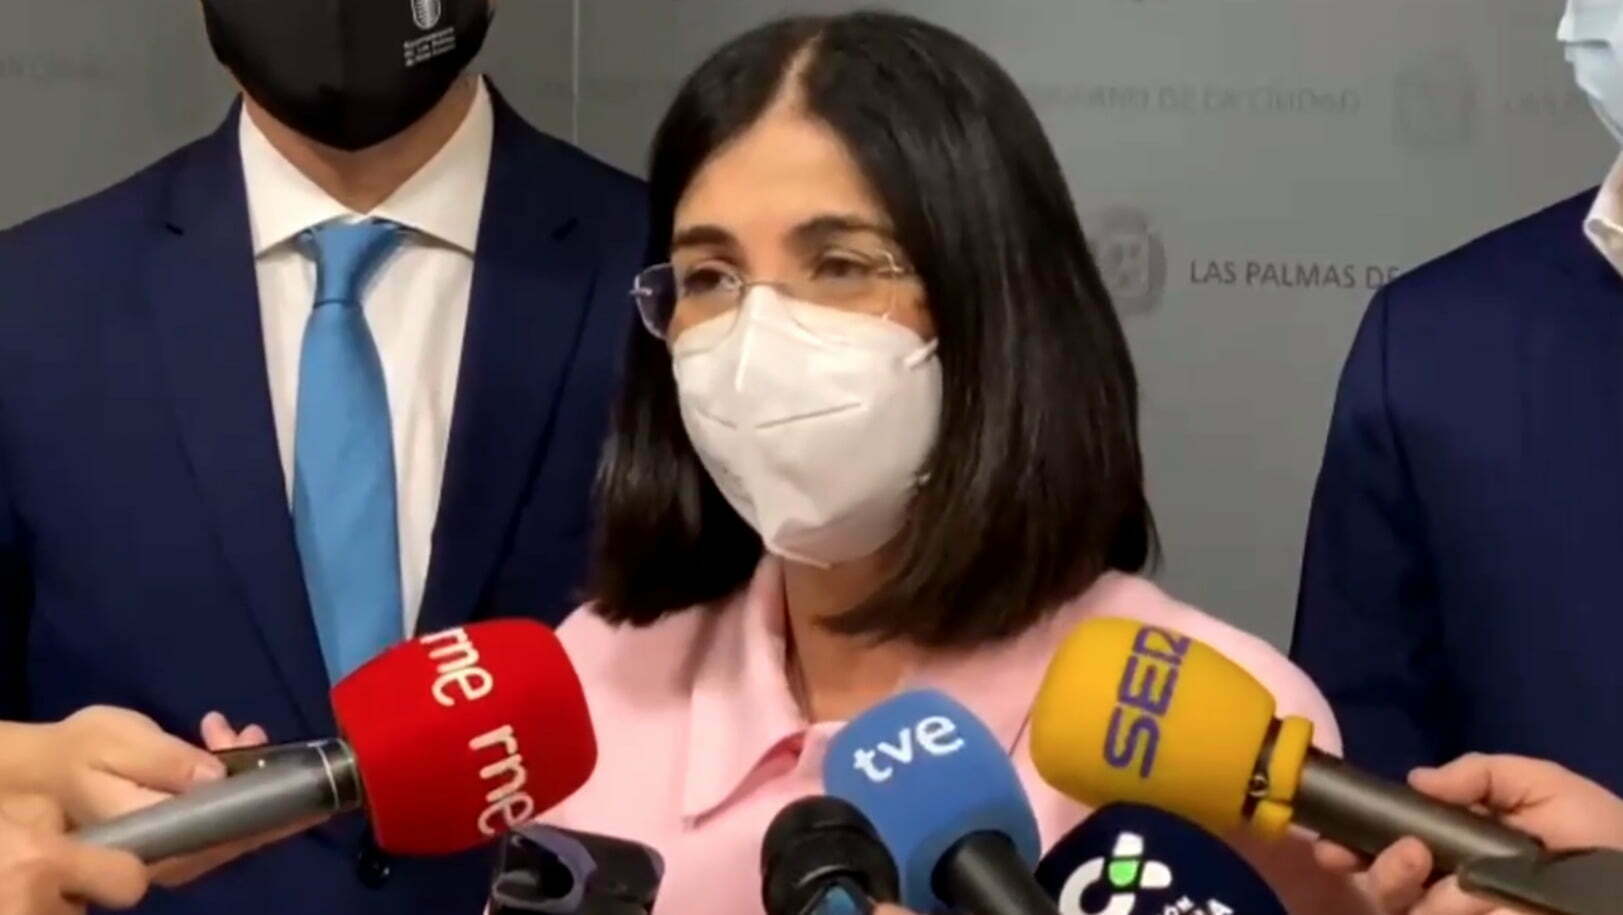 Masks indoors in Spain will no long be mandatory from next Wednesday in most settings